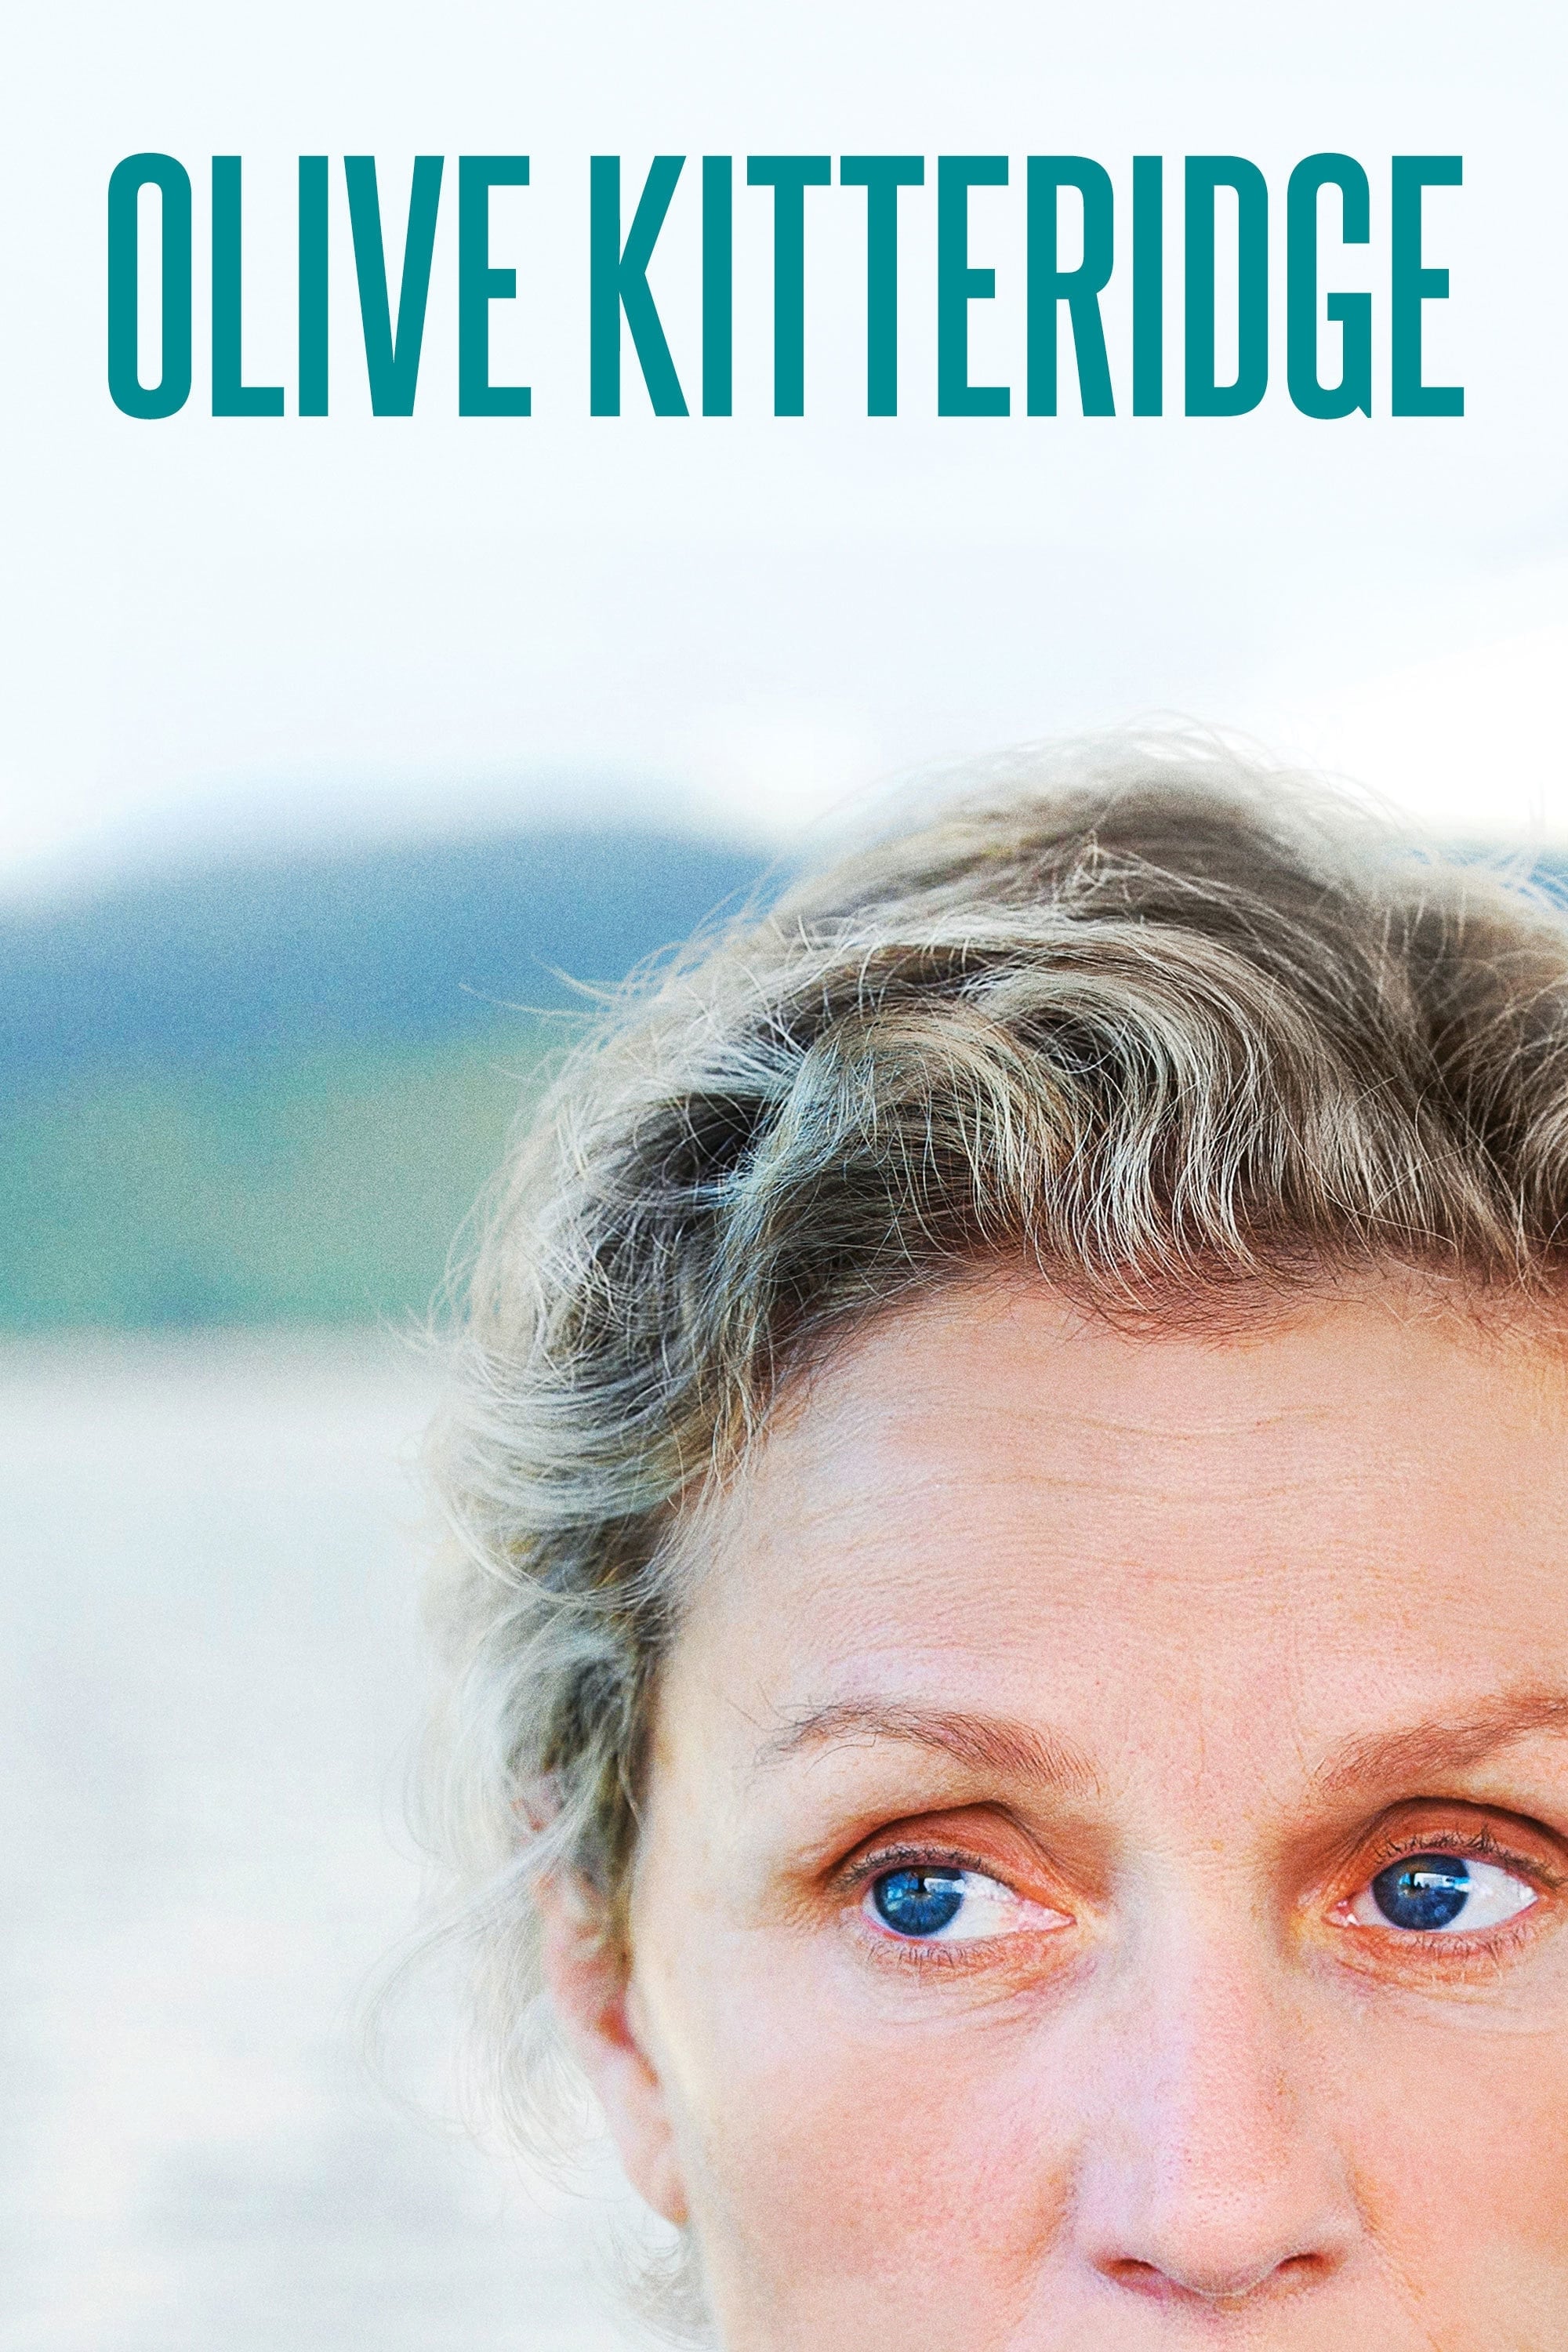 Olive Kitteridge TV Shows About Maine